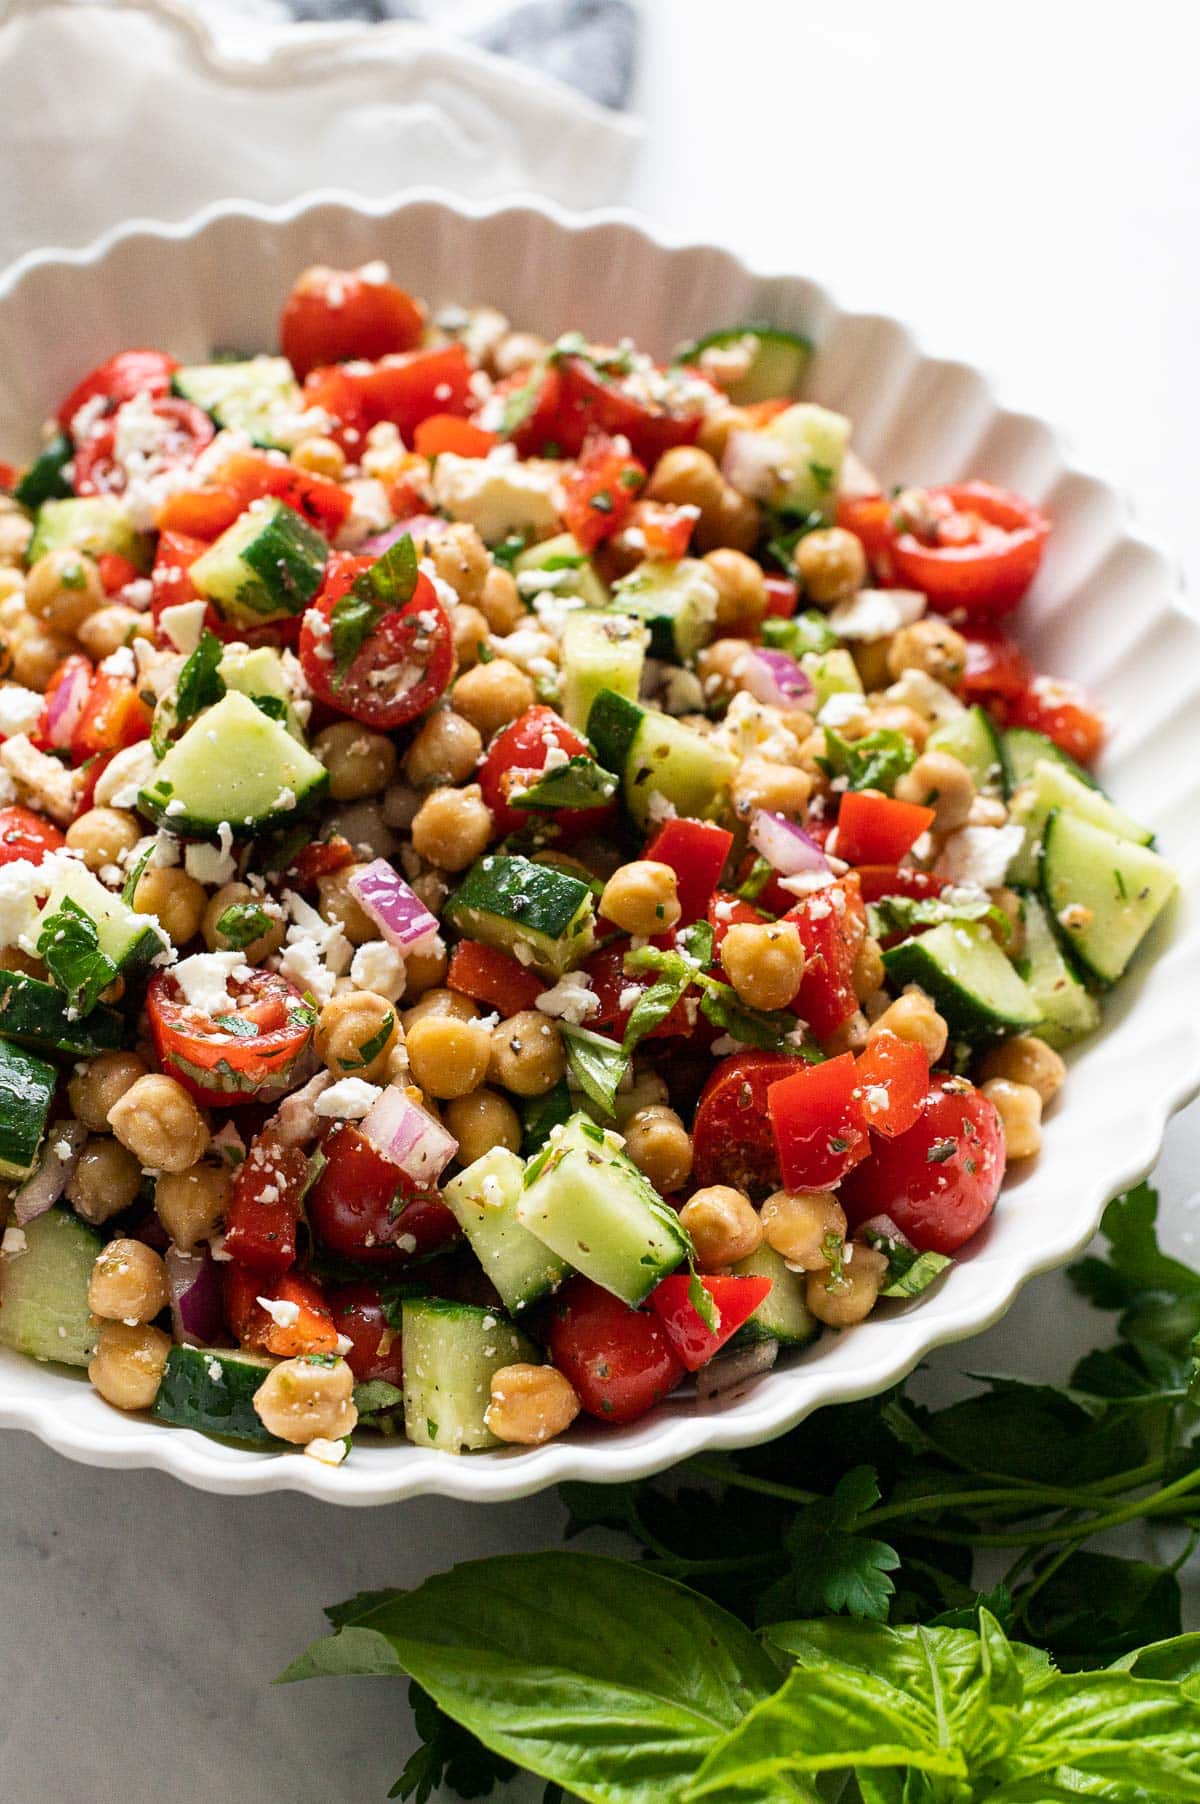 Side view of Mediterranean salad with chickpeas served in white bowl and fresh herbs nearby.